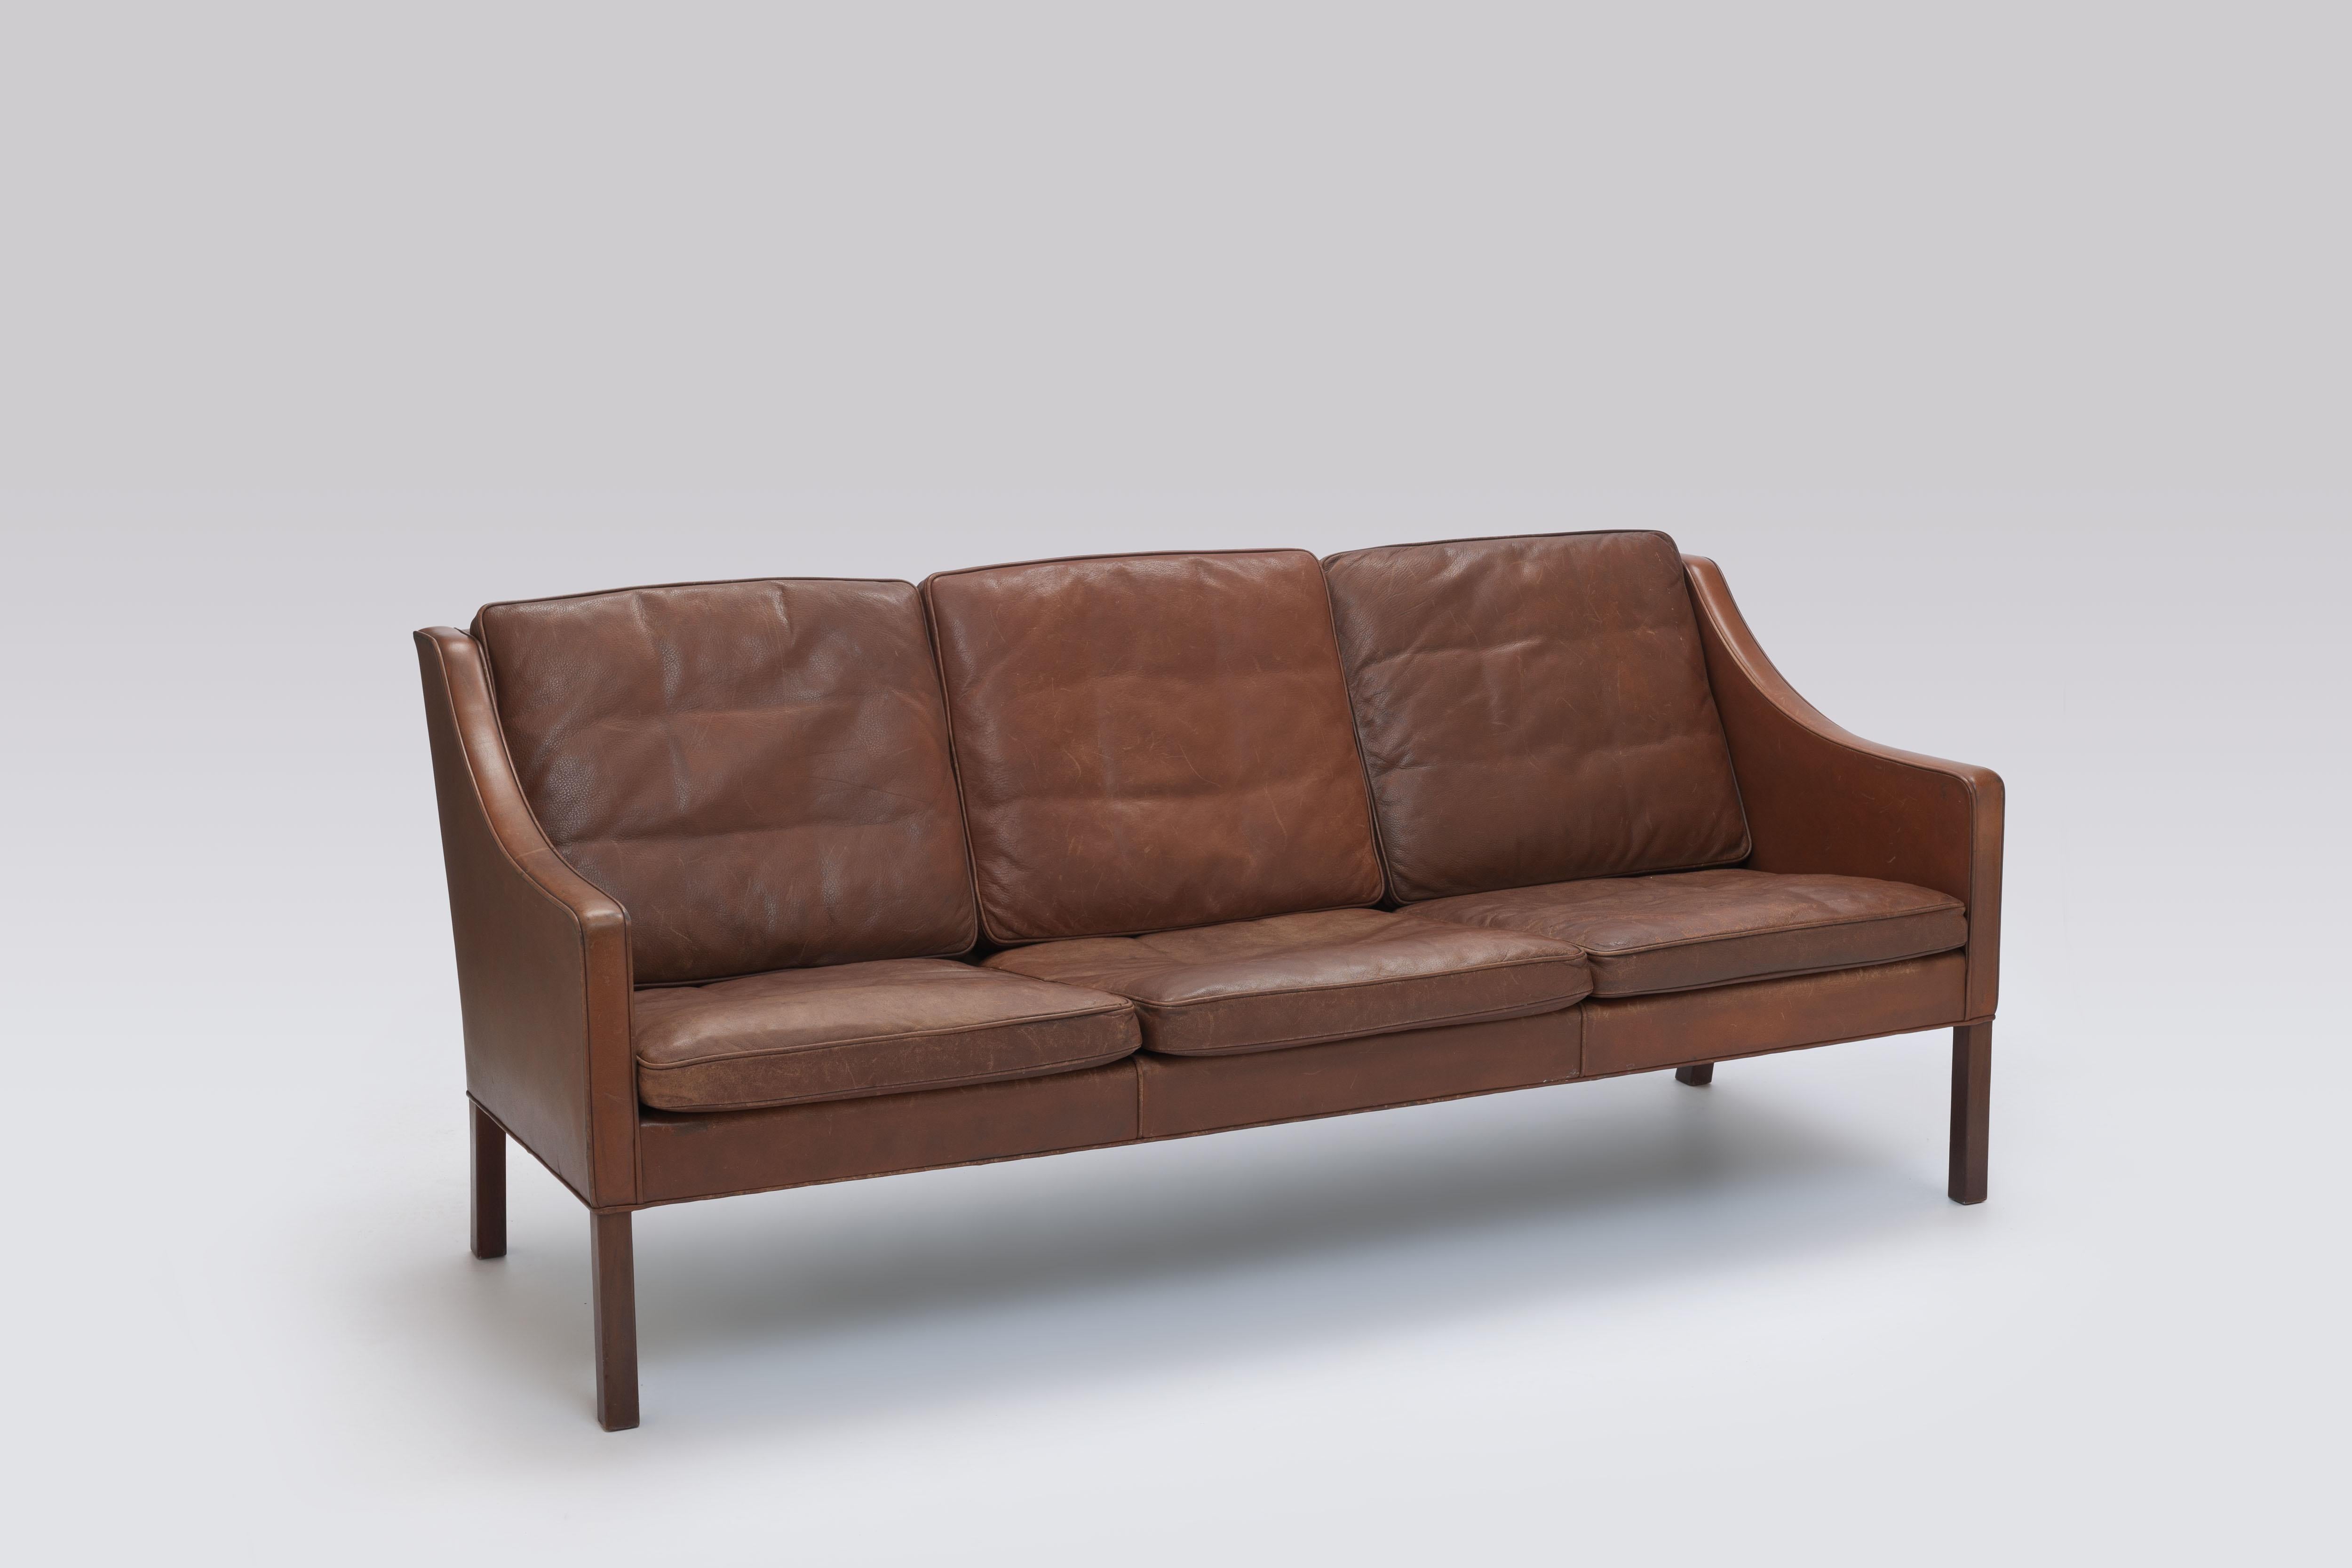 Iconic sofa model 2208 by Borge Mogensen in all original brown leather designed in 1963 executed by Fredericia in Denmark. 
This very high end manufactured sofa is very comfortable, due to down filled cushions, it's elegantly shaped and beautiful